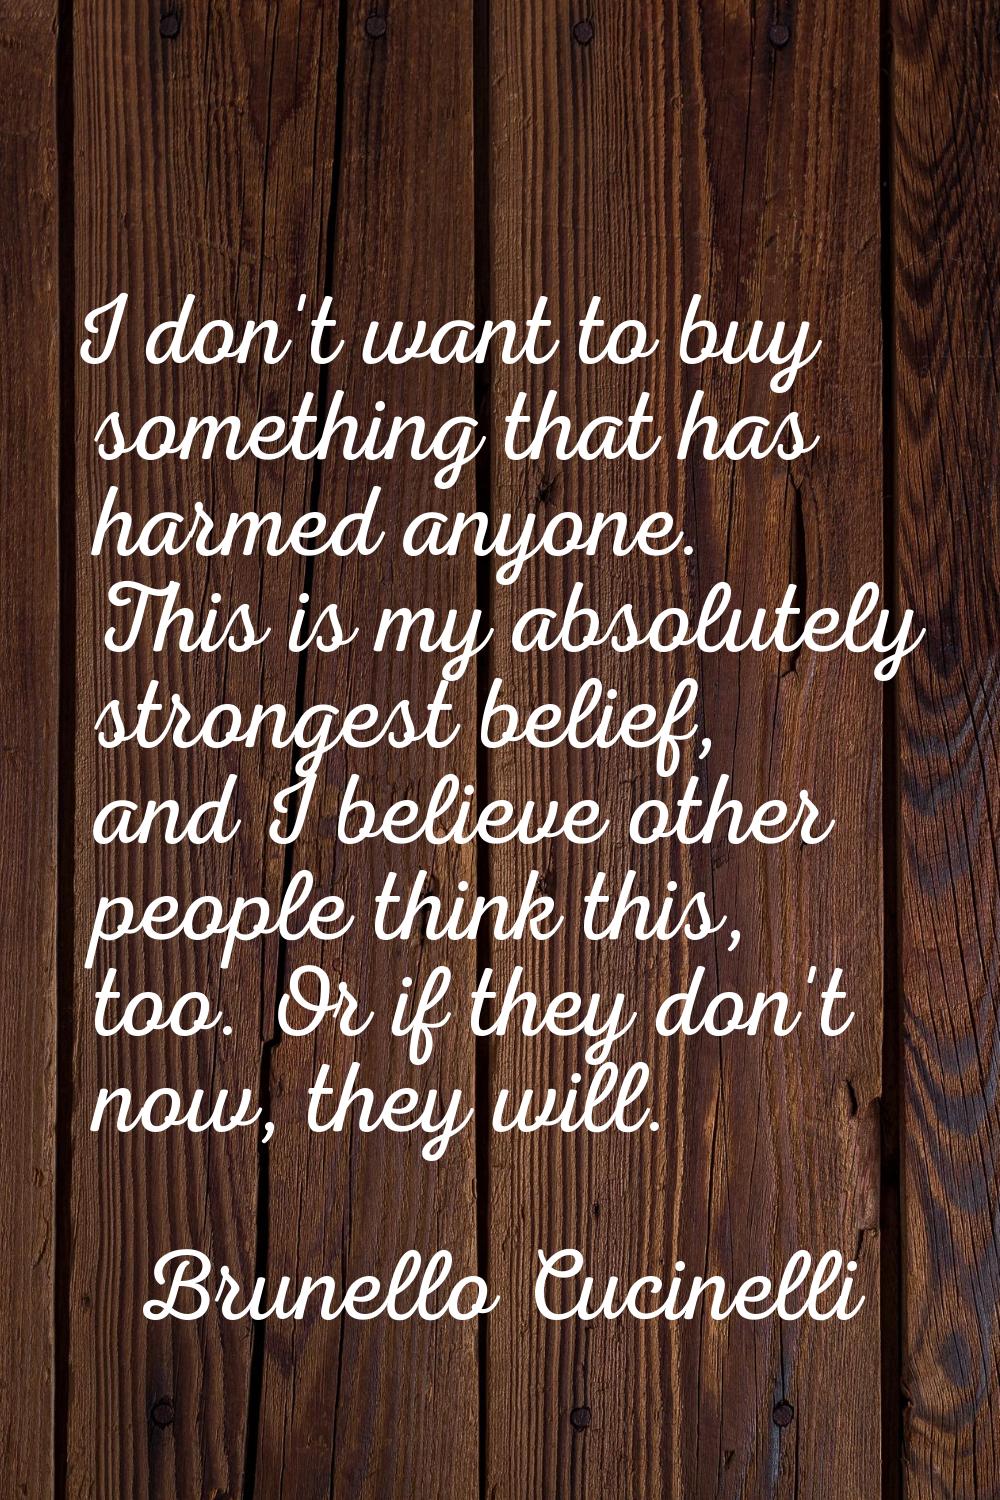 I don't want to buy something that has harmed anyone. This is my absolutely strongest belief, and I